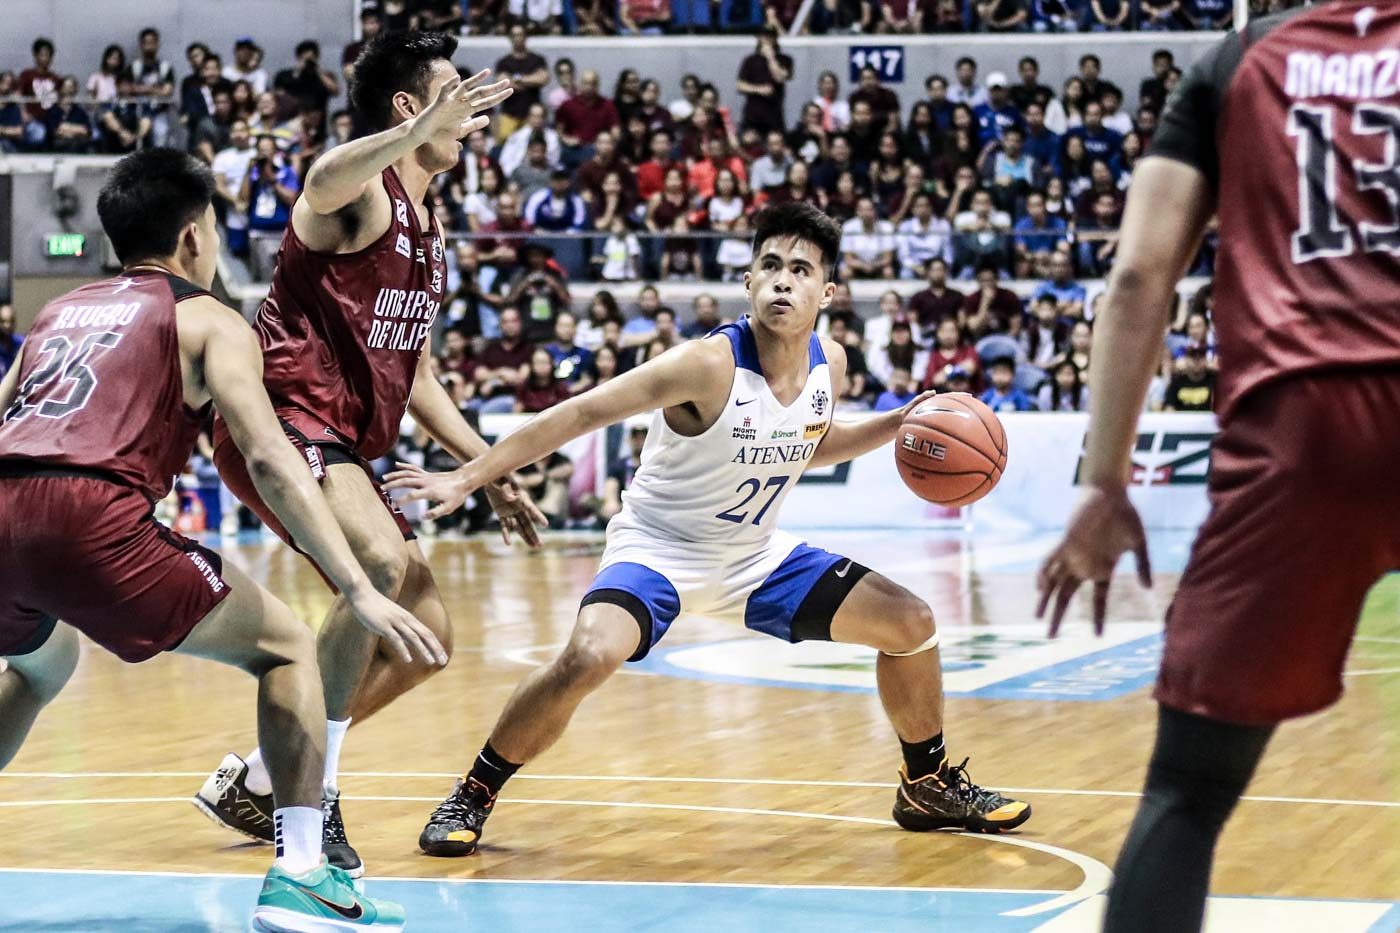 UP is better, but so is Ateneo